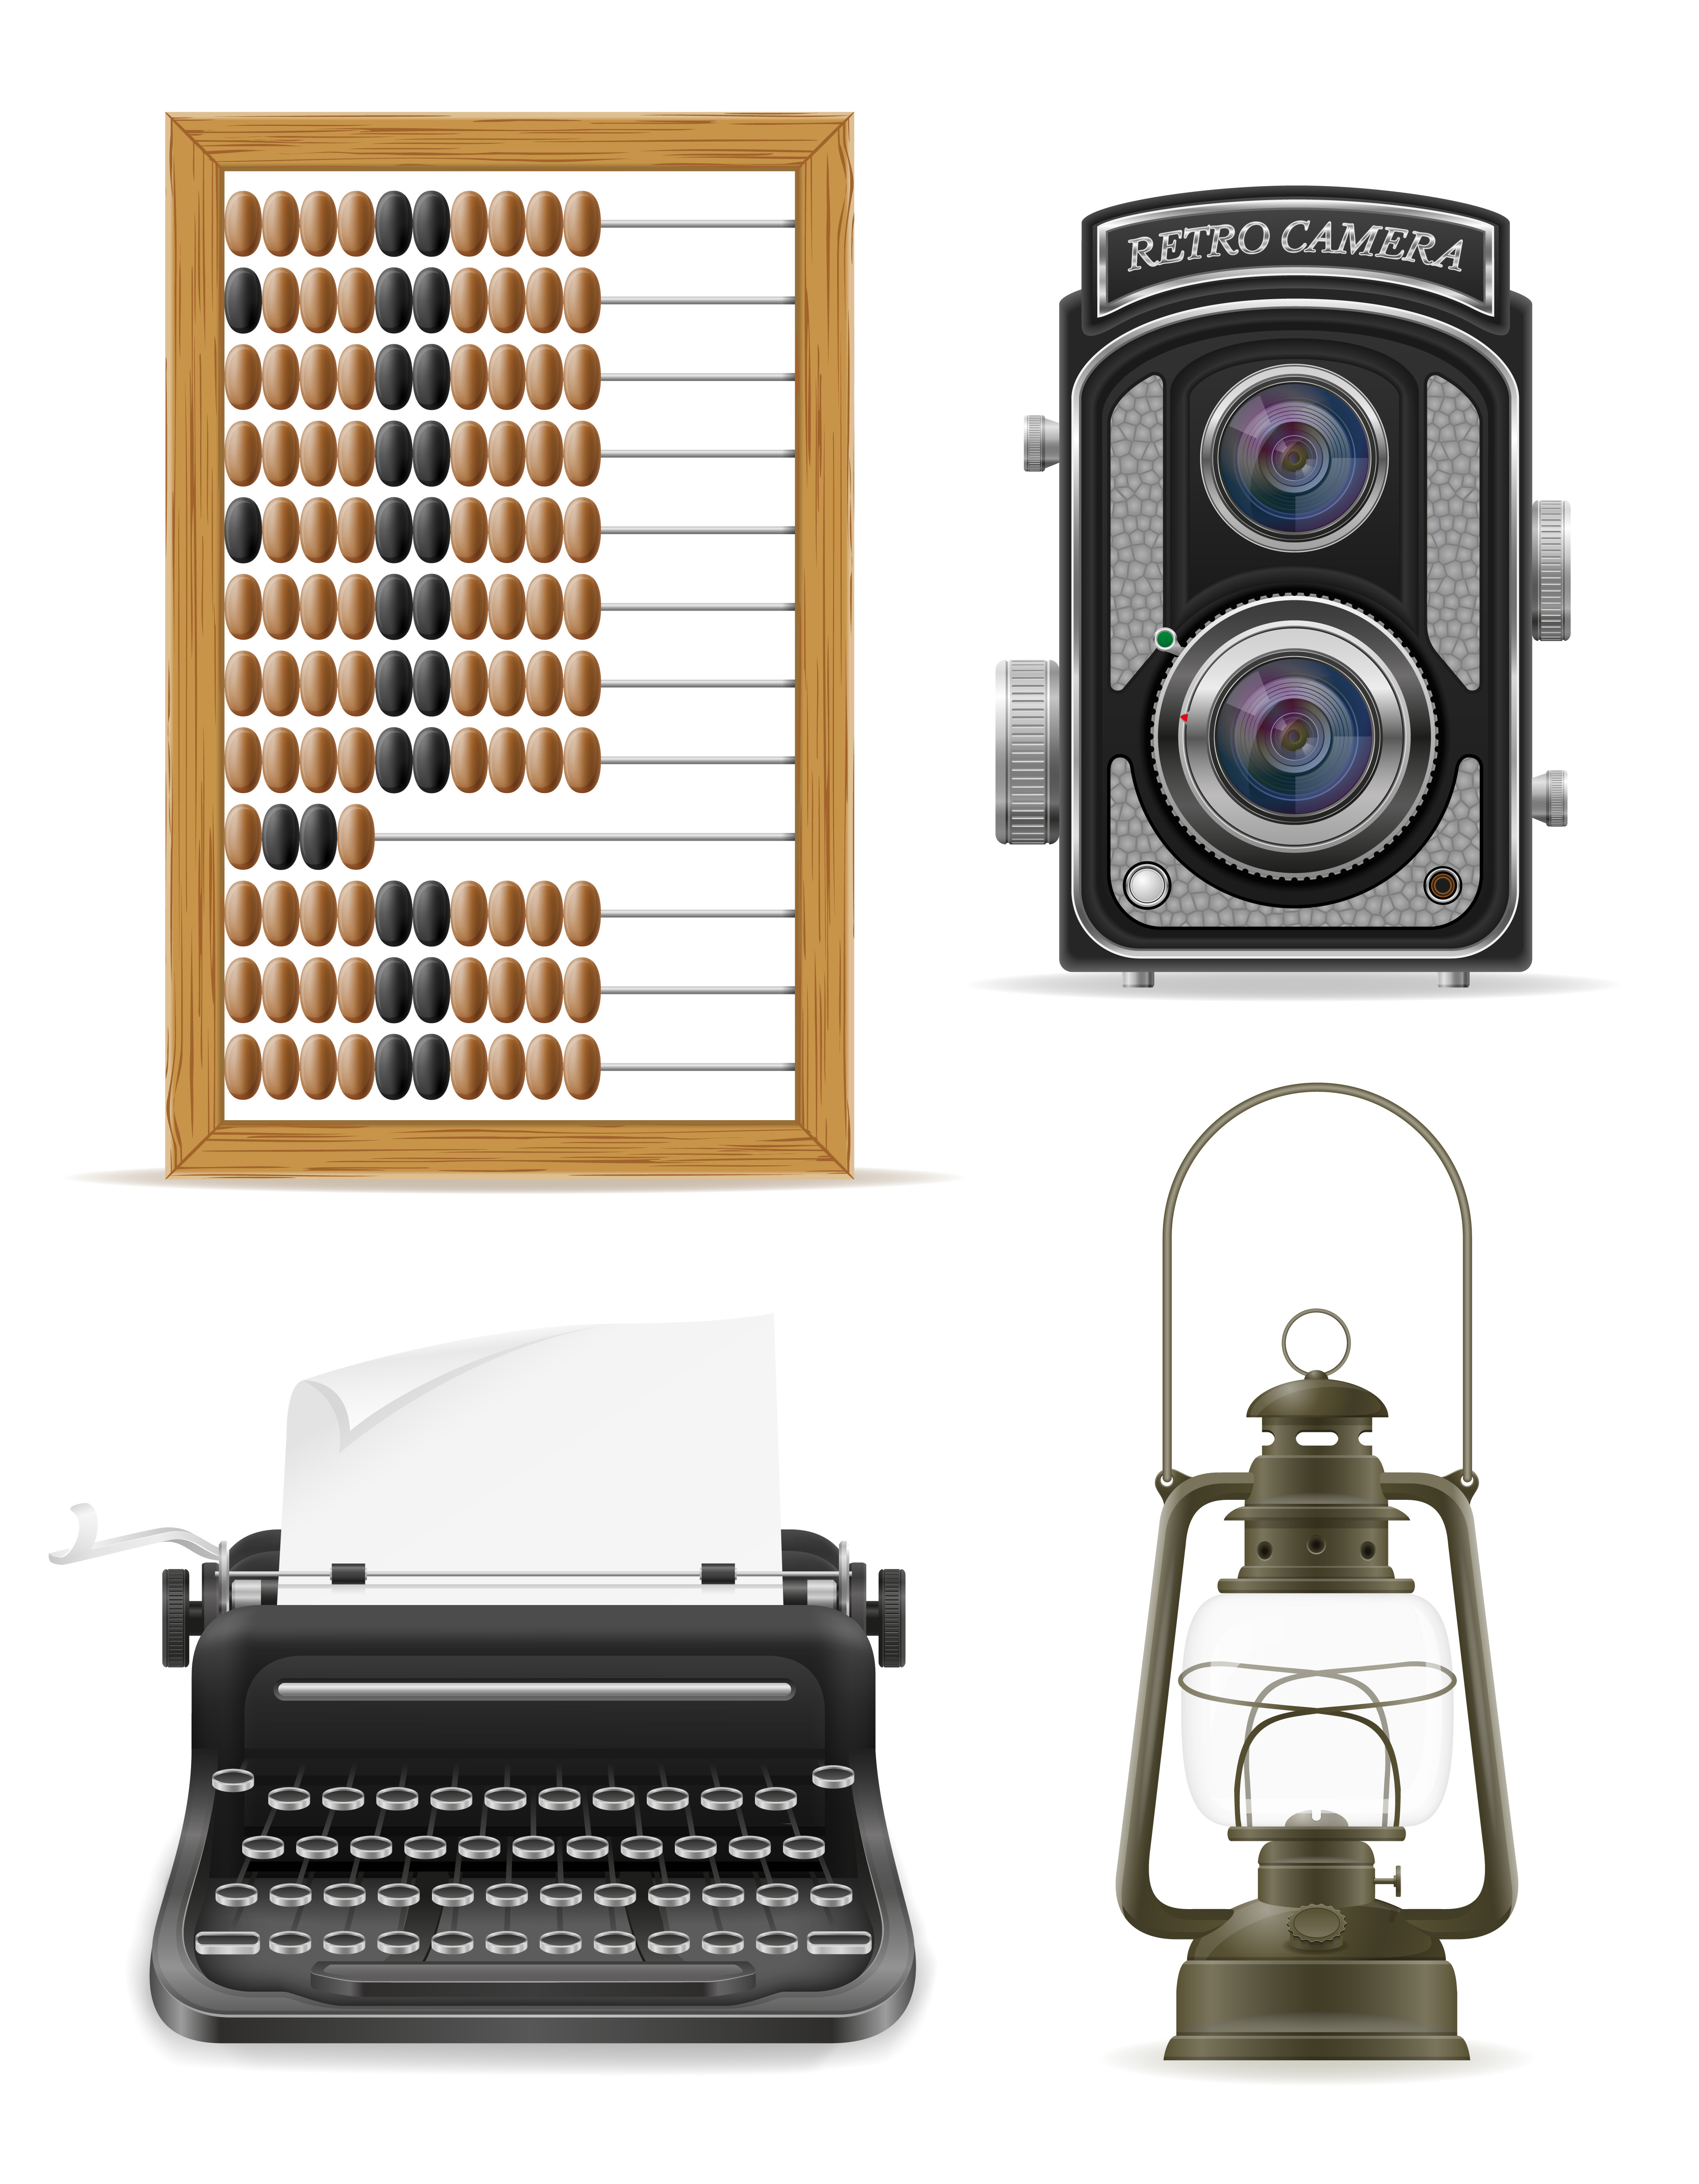 Download objects old retro vintage icon stock vector illustration - Download Free Vectors, Clipart ...